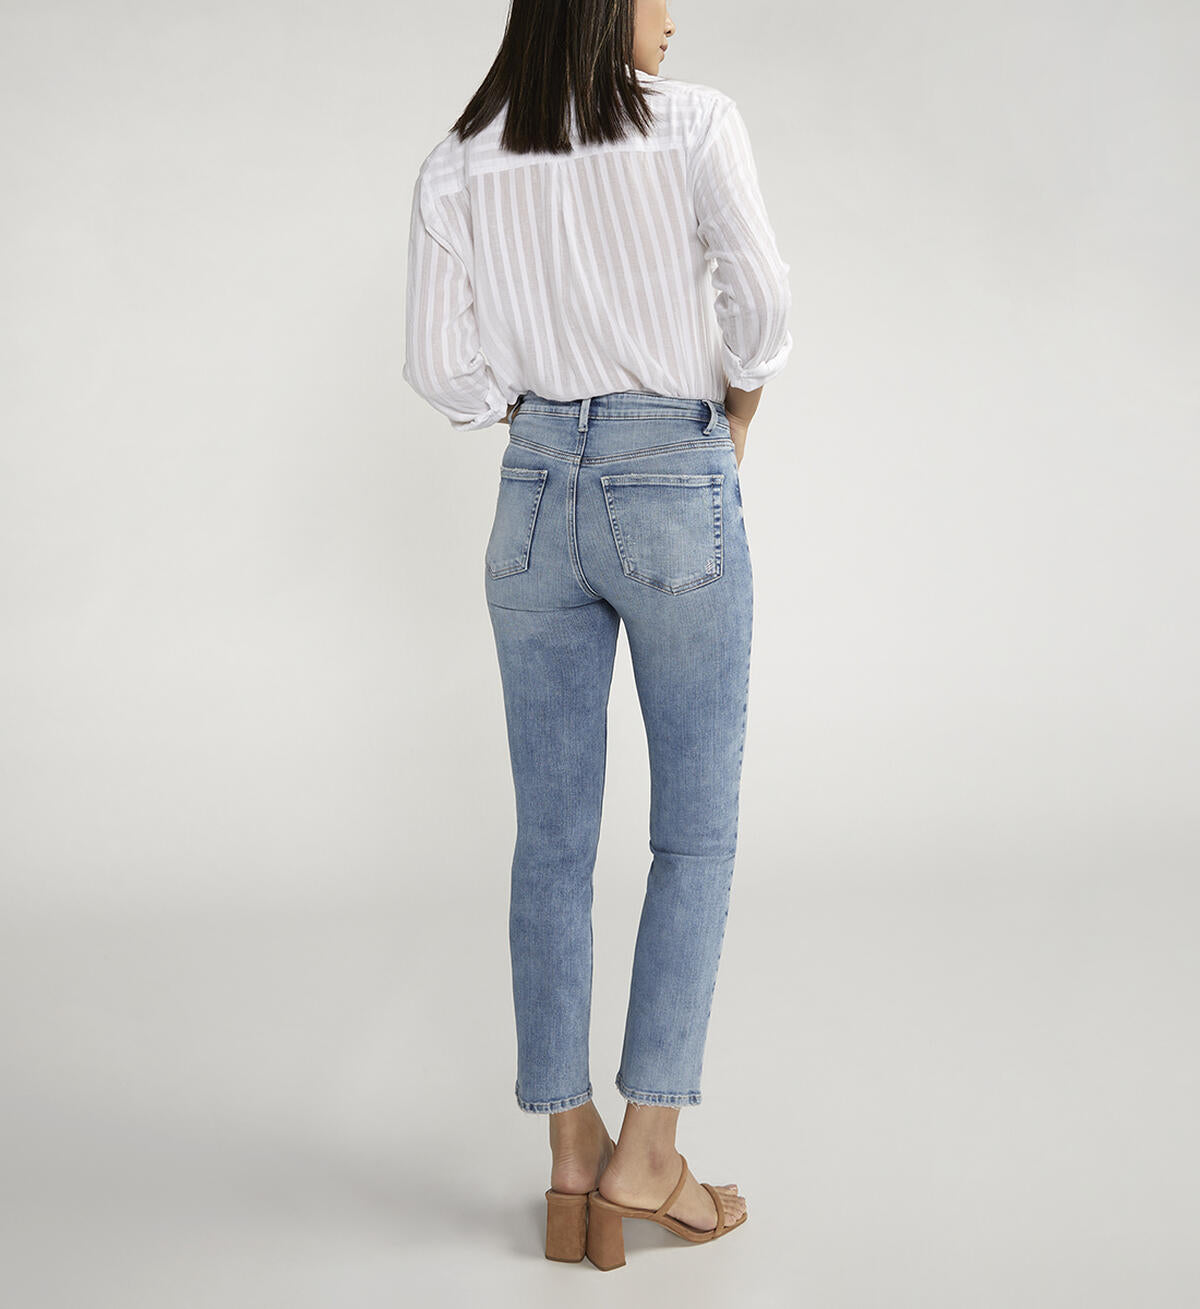 Isbister HR Ankle Jean